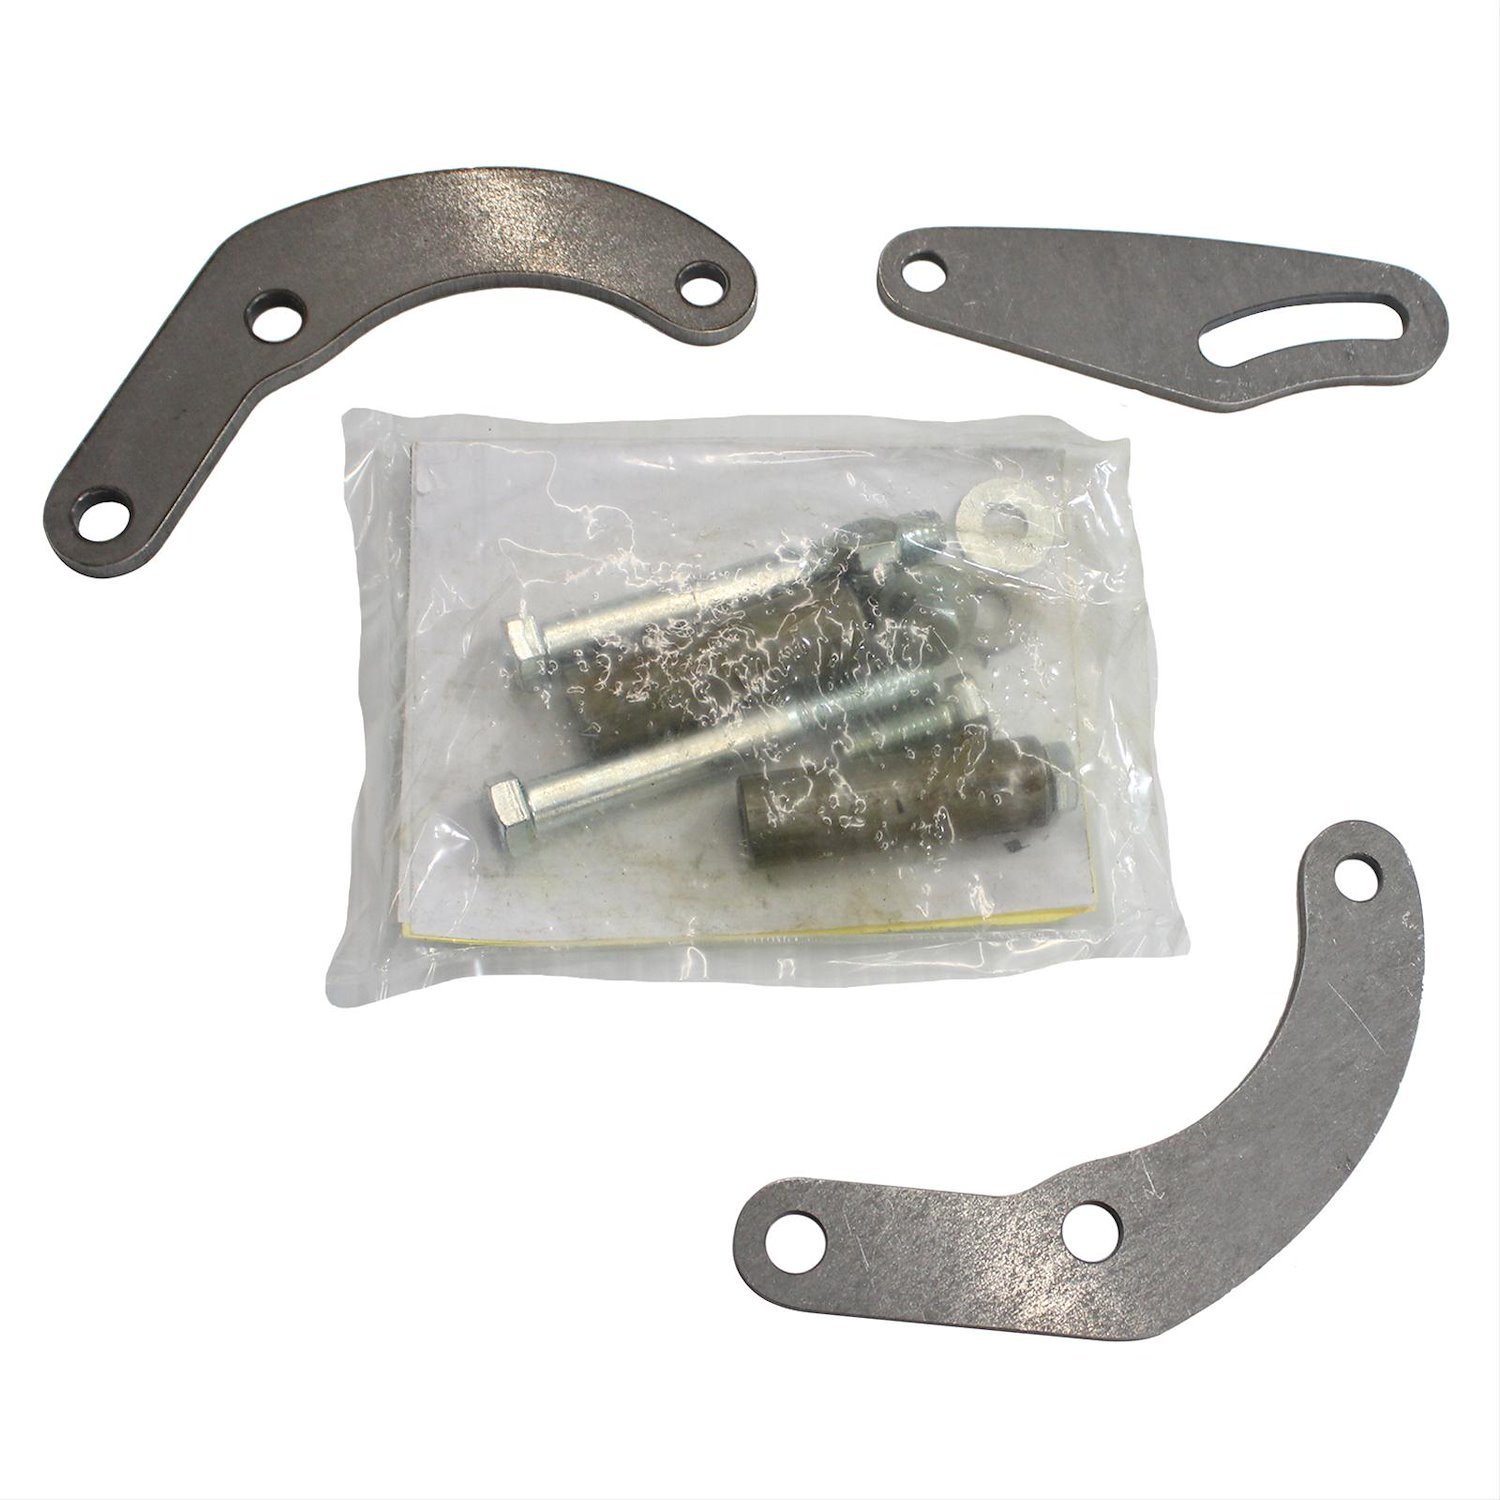 Self-Contained Power Steering Pump Bracket Big Block Chevy with Short Water Pump